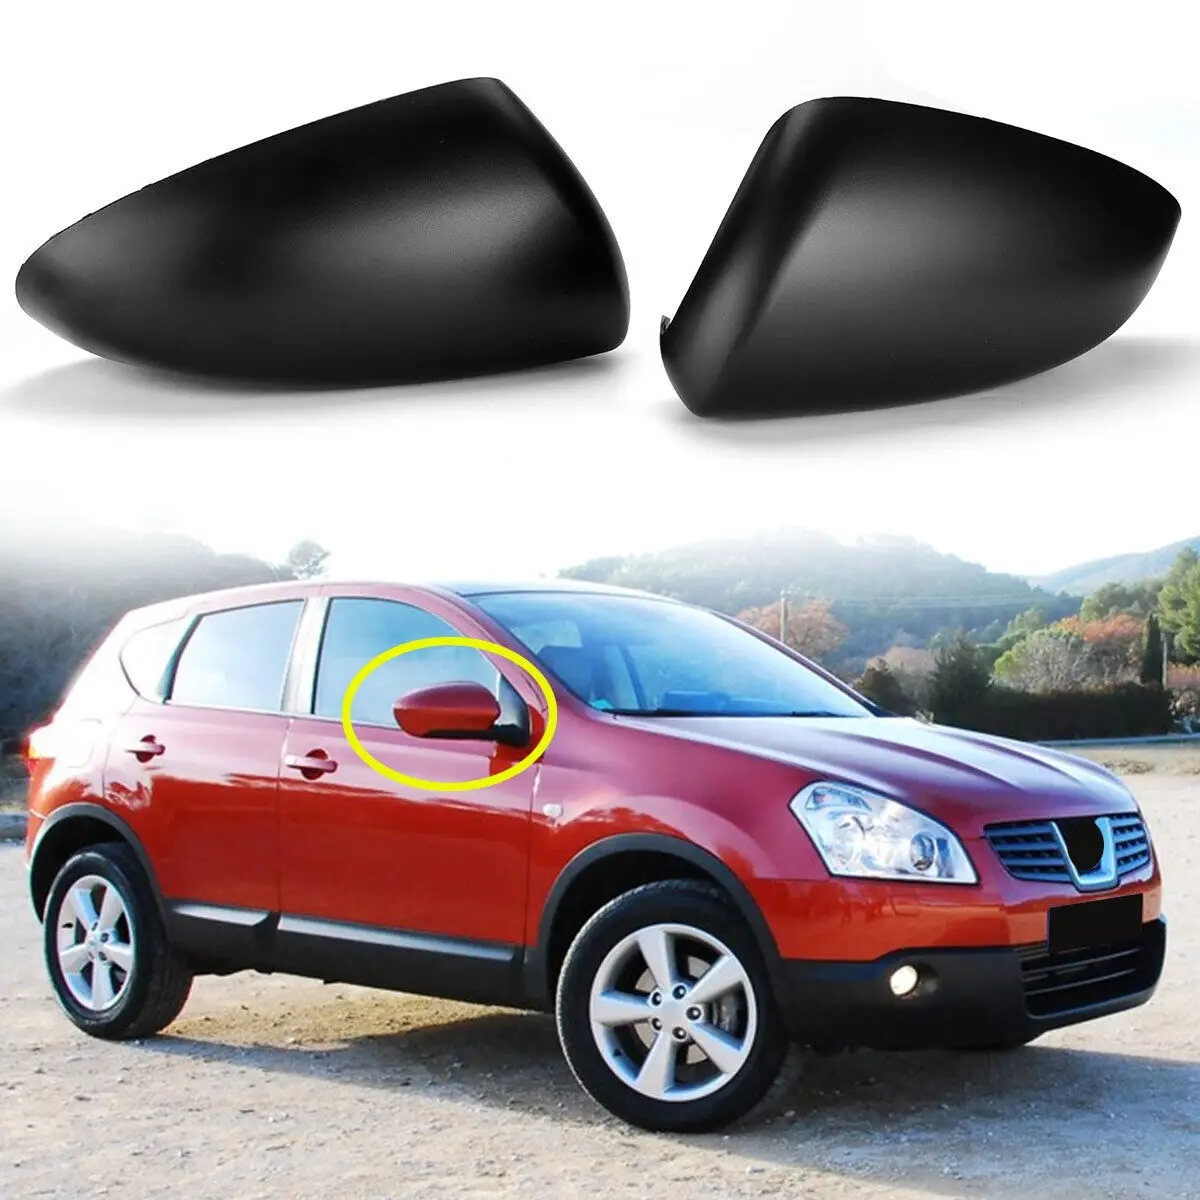 

2Pcs For Nissan Qashqai 2007-2014 J10 Side Door Rearview Mirror Cover Trims Car Accessories Left +Right Side Replacement Style